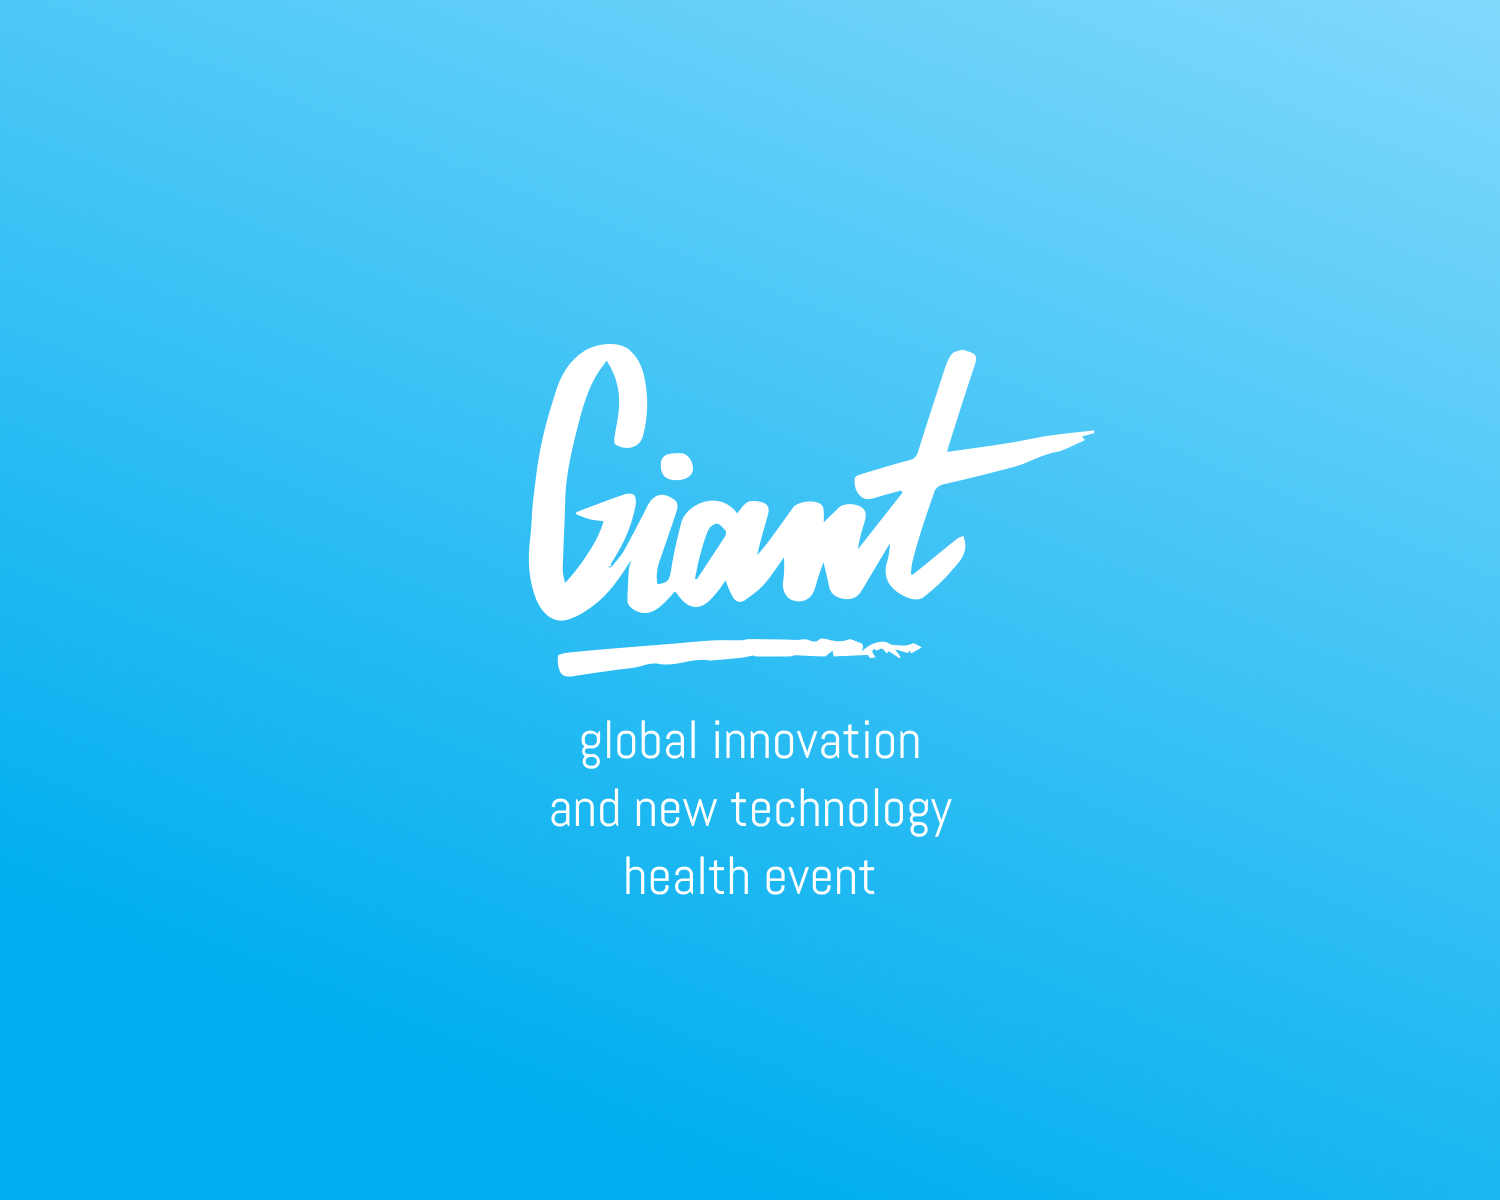 NIX Team Joins the Global Innovation and New Technology Health Event